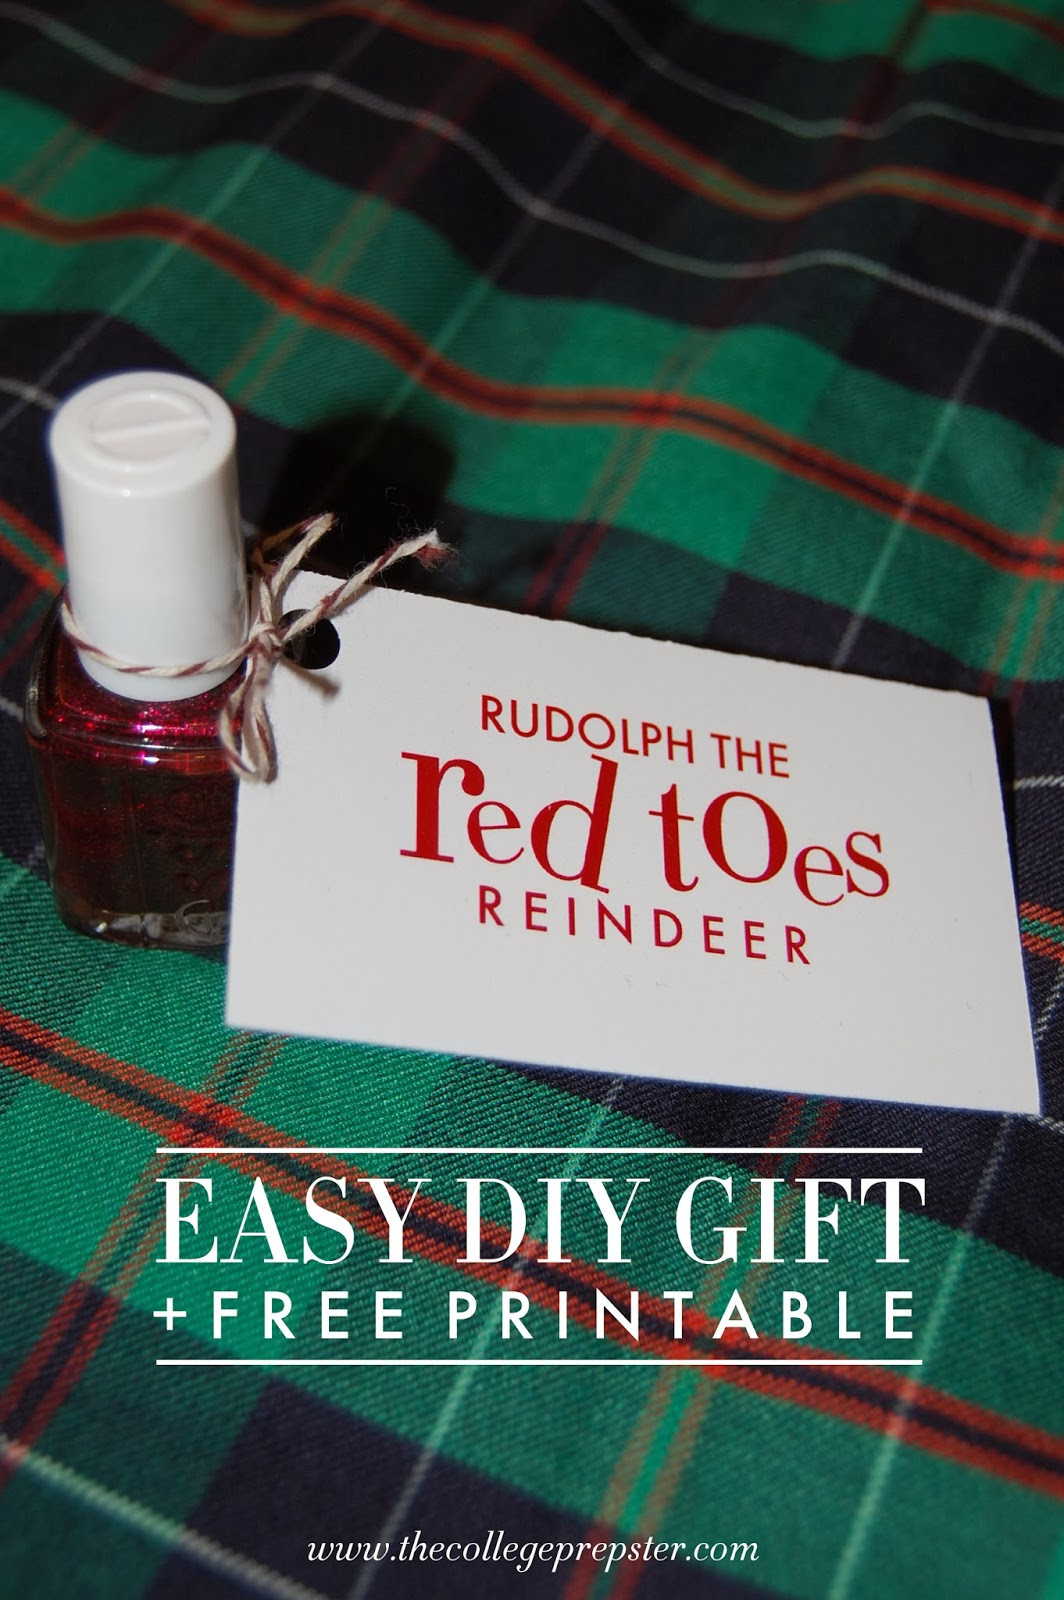 Simple Gift Ideas For Girlfriend
 Easy Gift for Girlfriends Under $10 Carly the Prepster